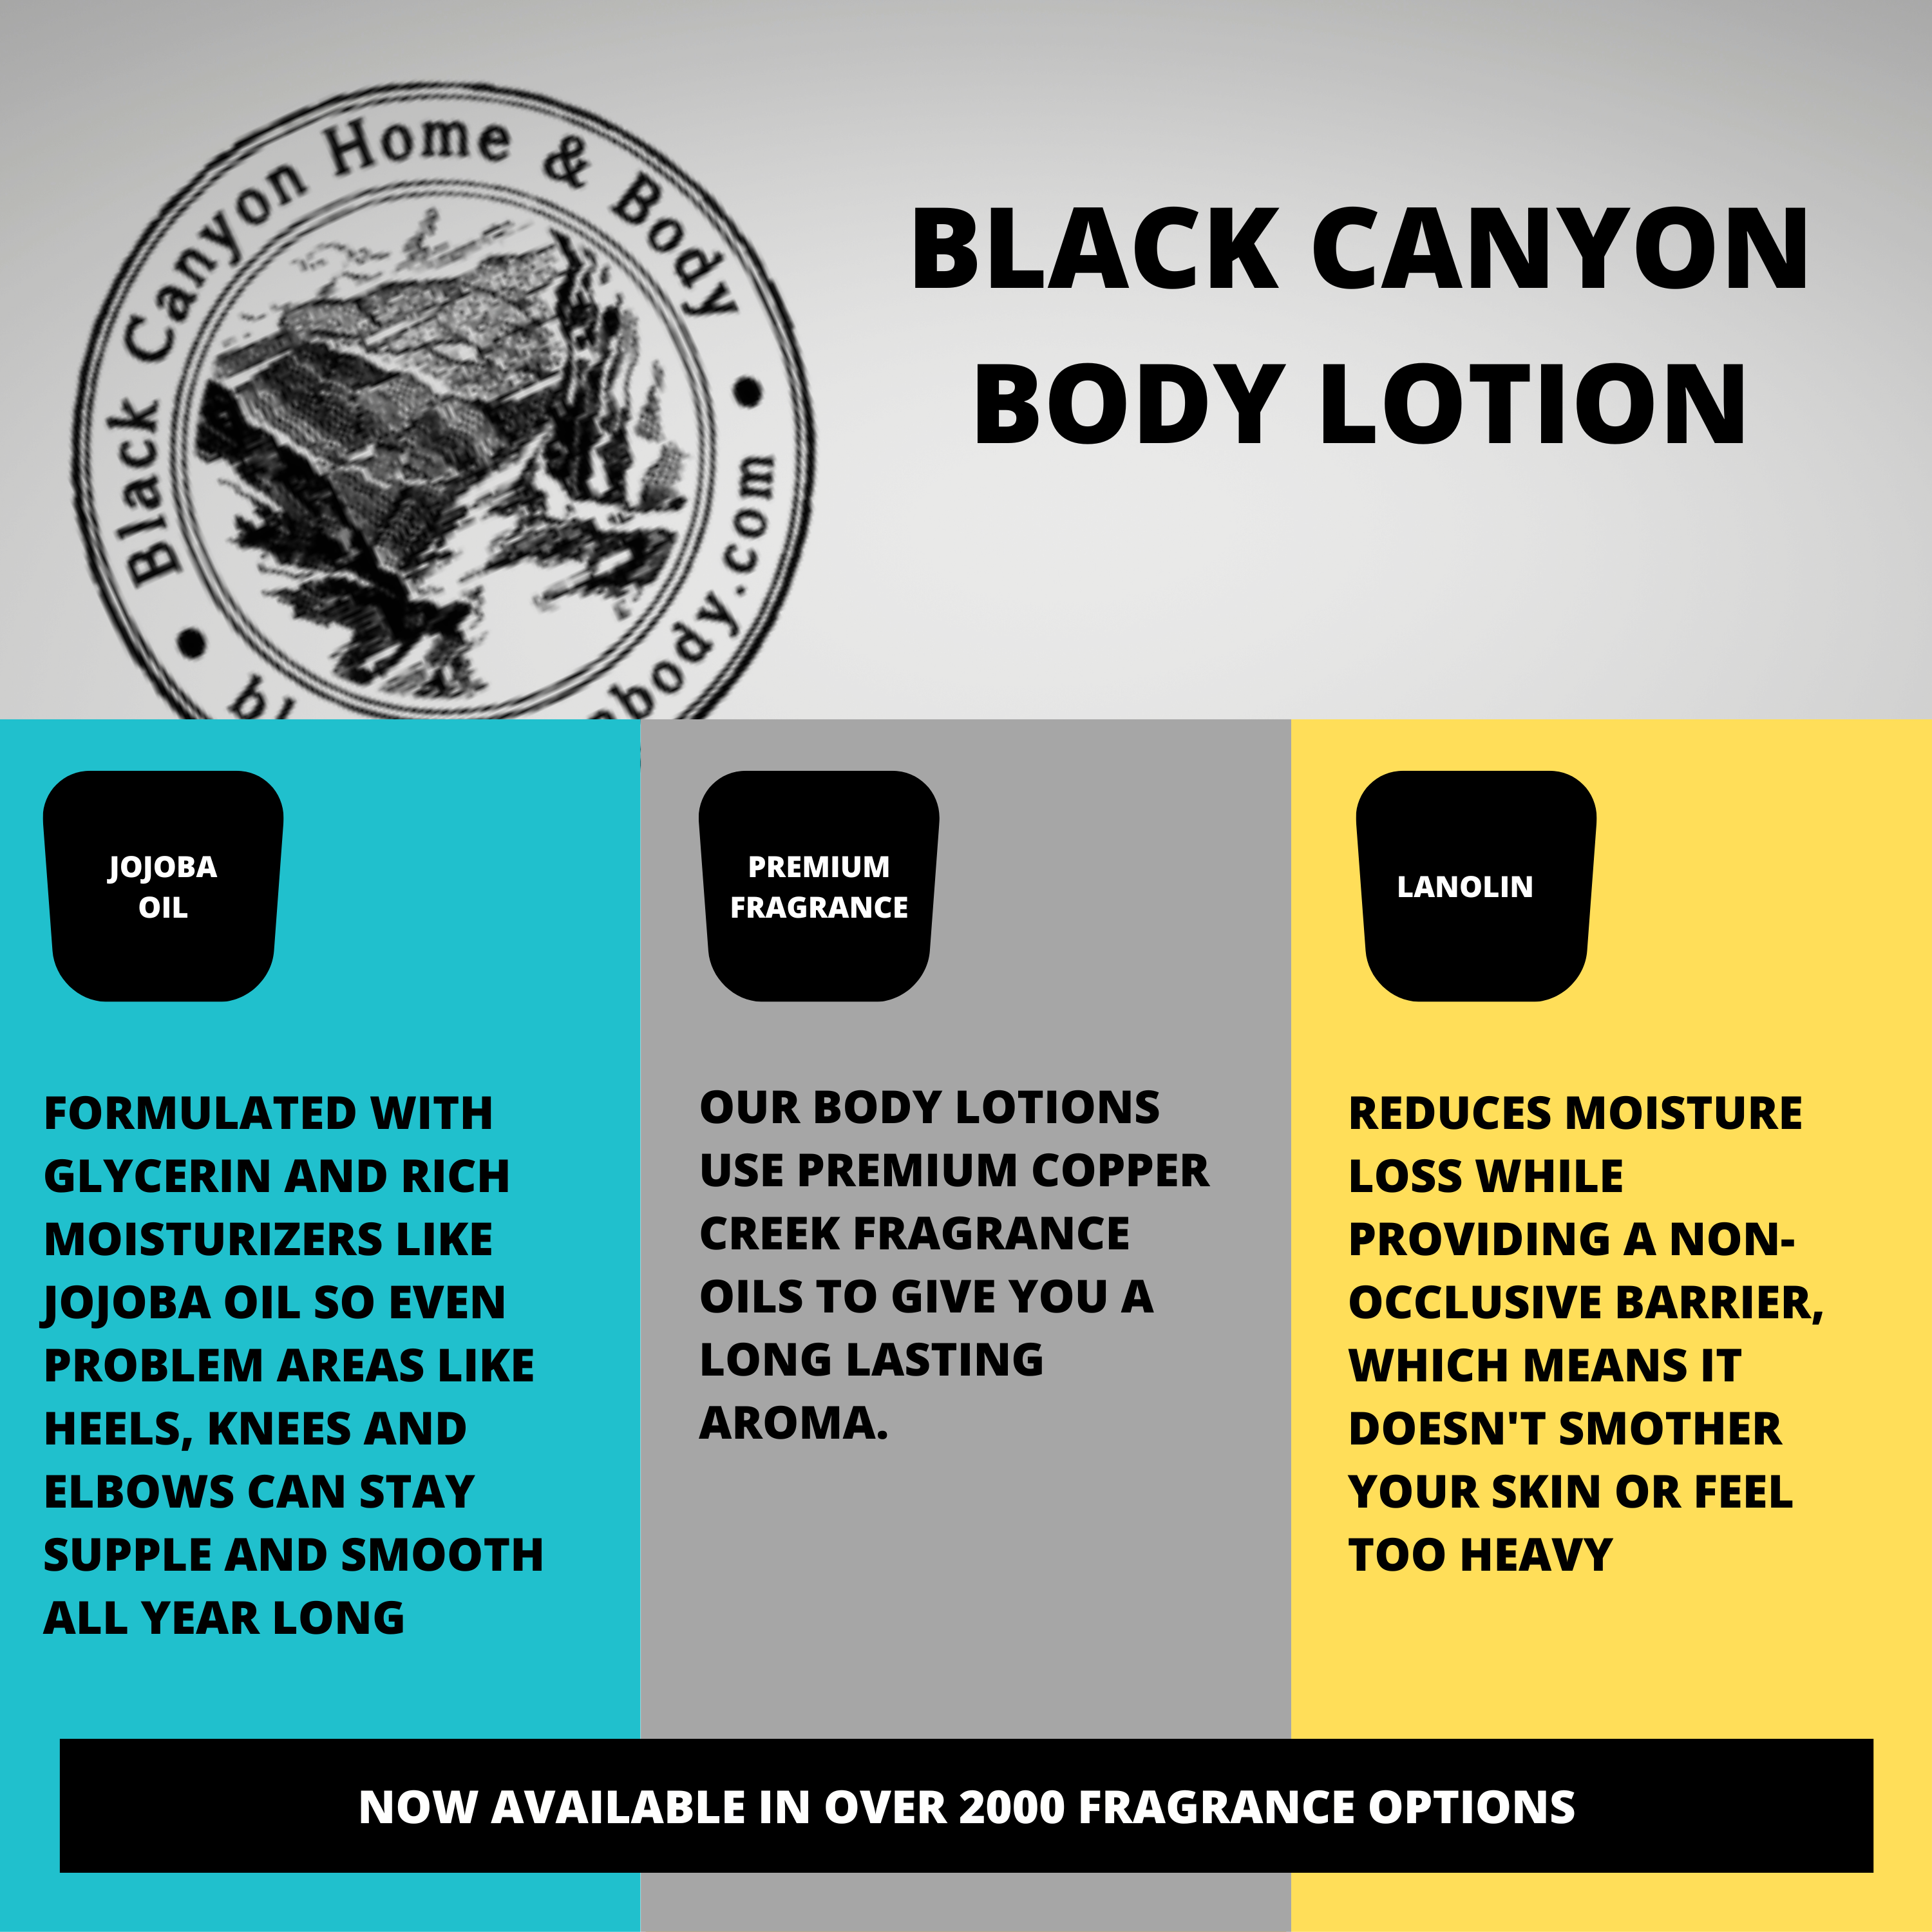 Black Canyon Banana Coconut Scented Luxury Body Lotion with Lanolin and Jojoba Oil